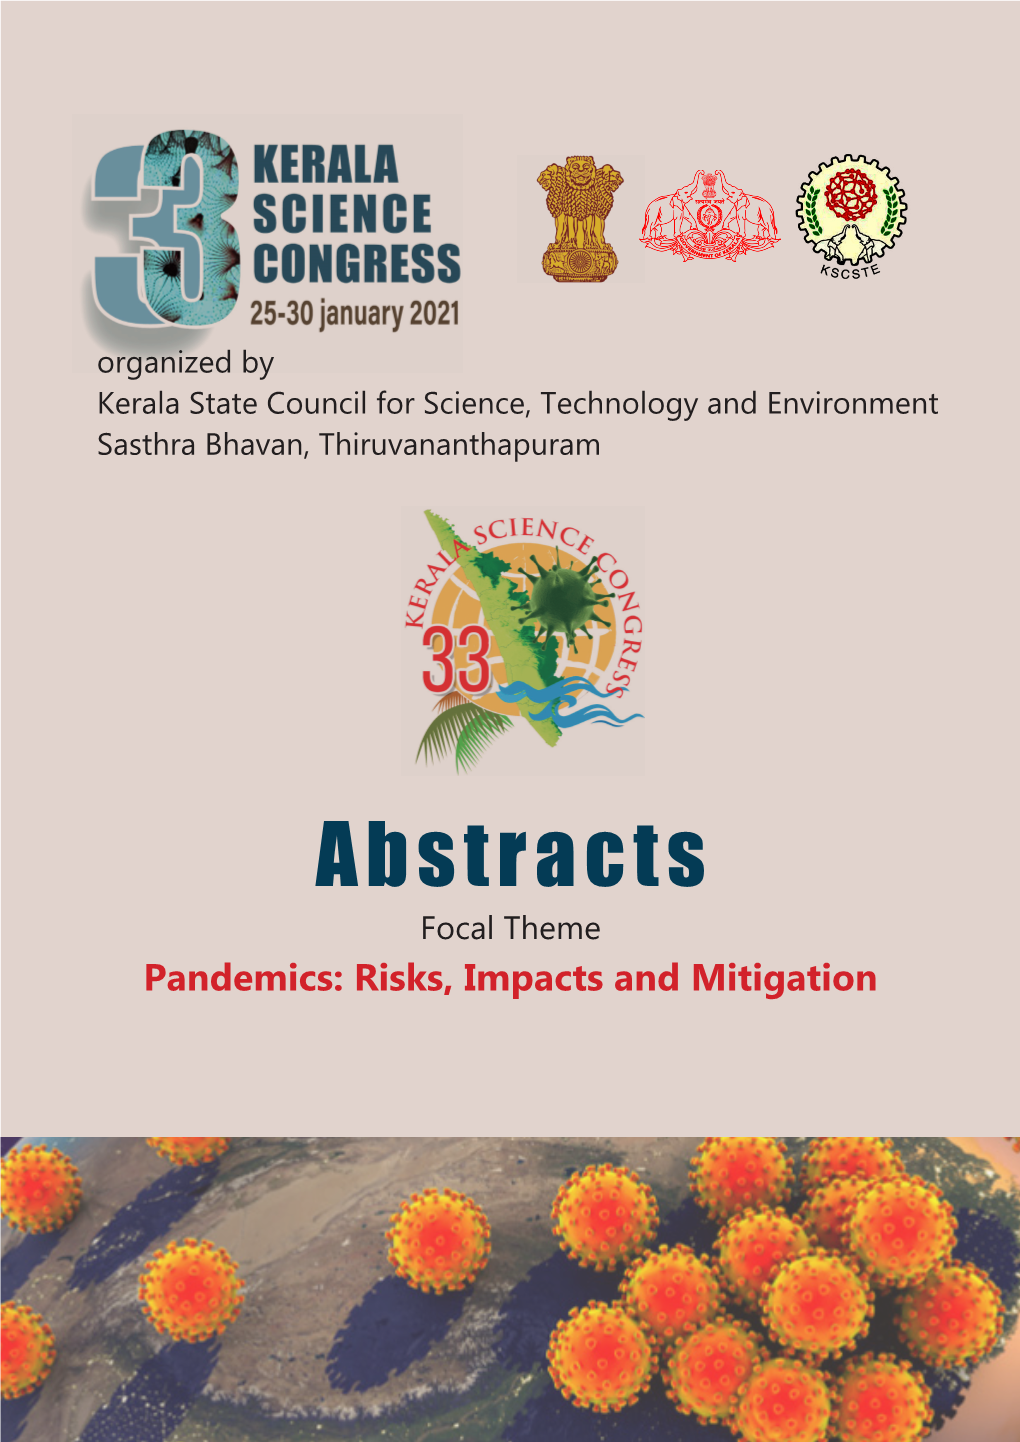 Abstracts Focal Theme Pandemics: Risks, Impacts and Mitigation